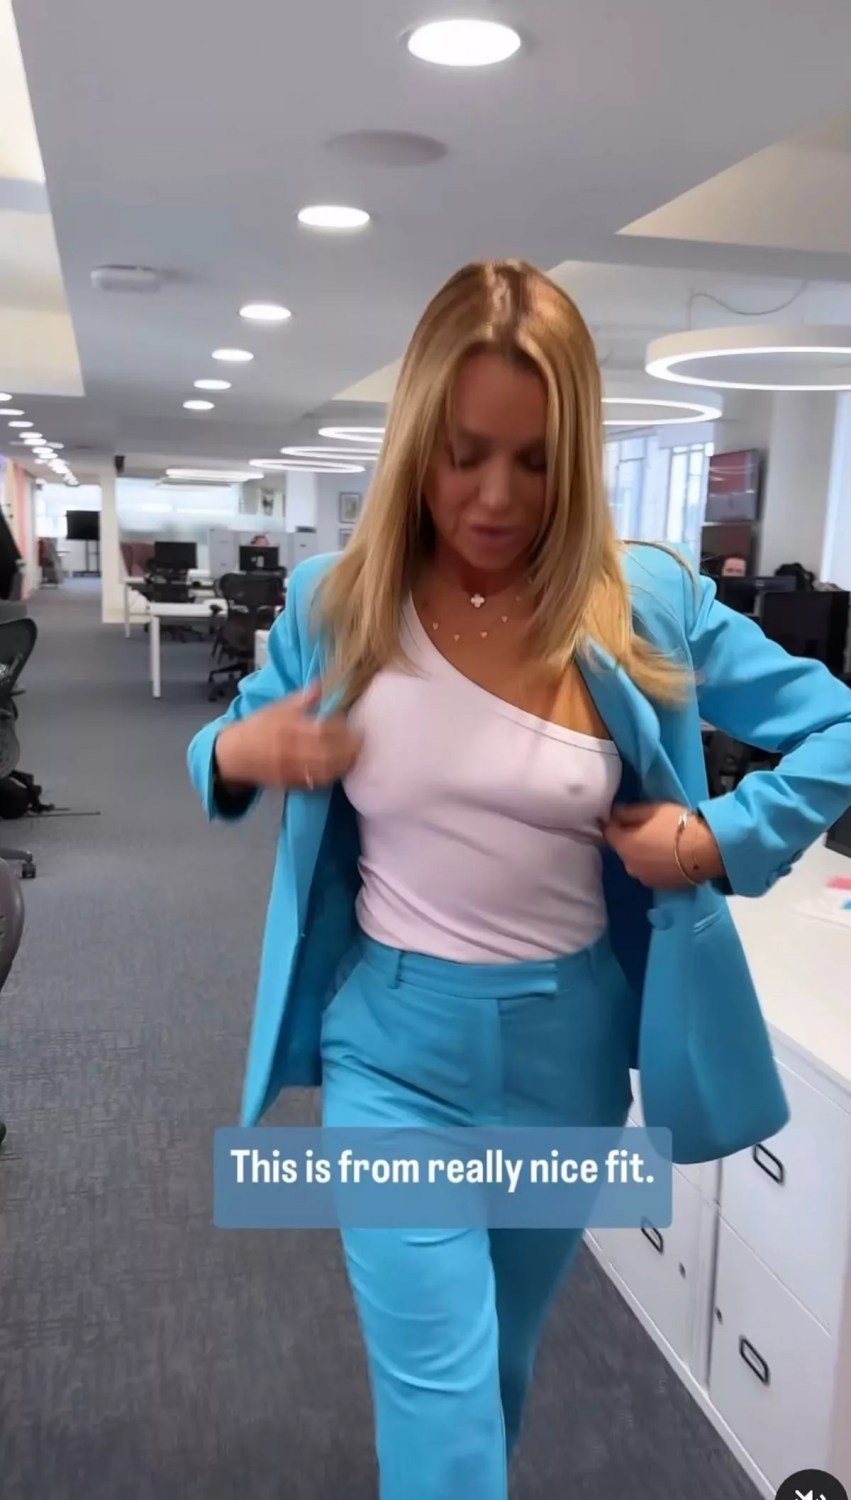 Amanda Holden Opens Her Jacket Wide Without Bra While Fans Call Her 'Breathtaking'